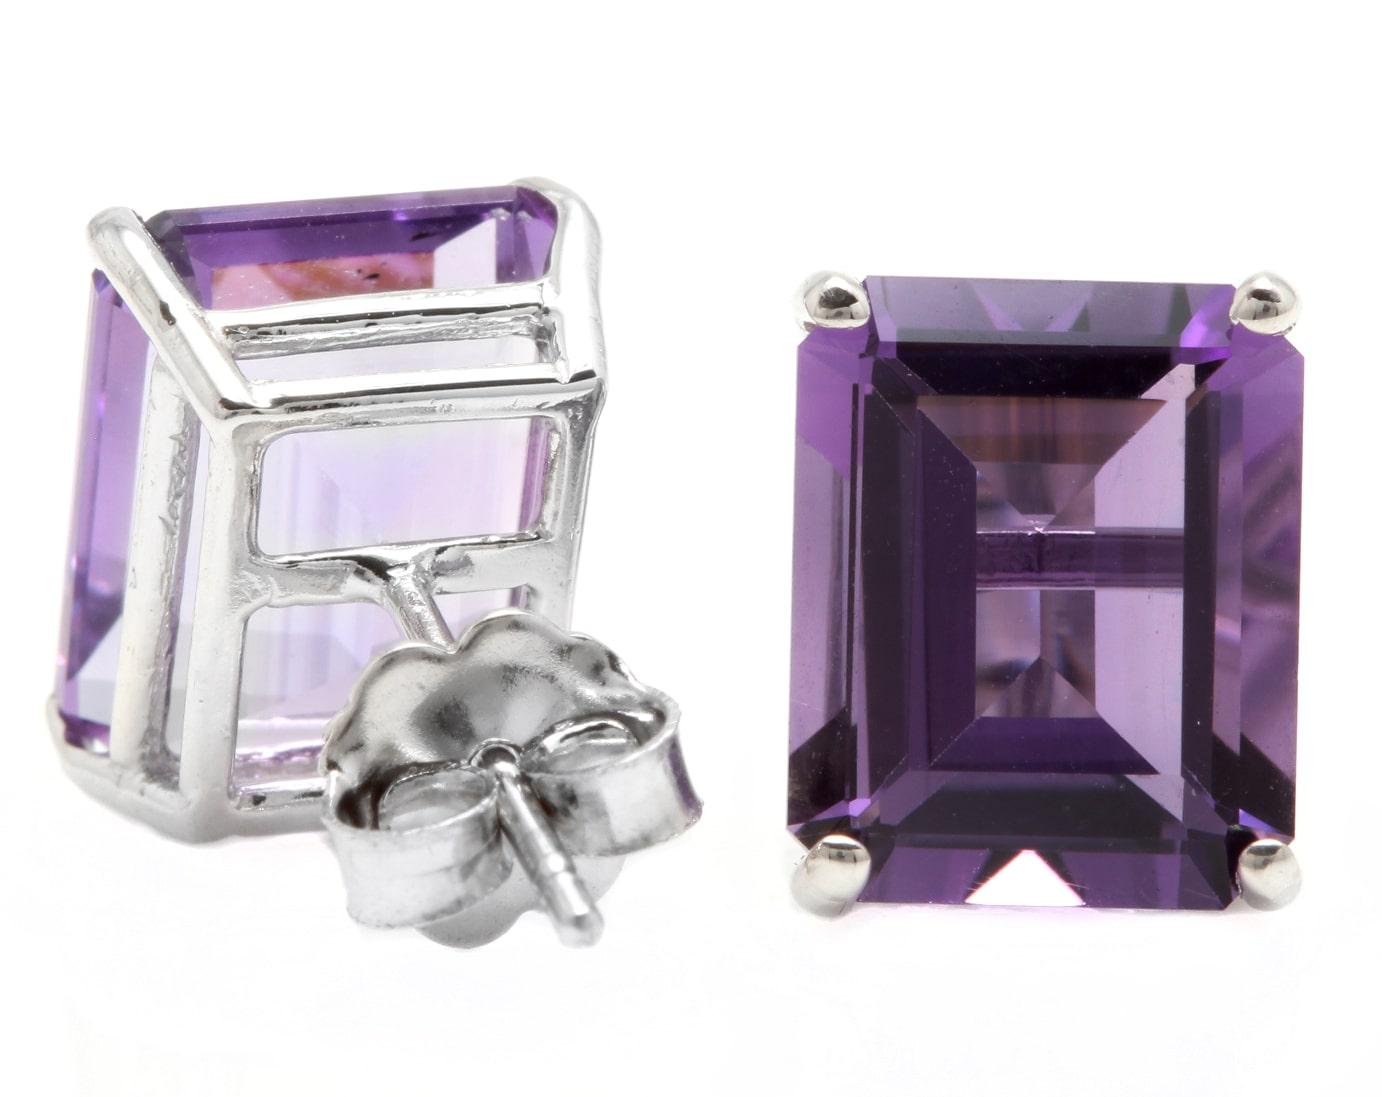 Exquisite Top Quality 7.45 Carats Natural Amethyst 14K Solid White Gold Stud Earrings

Amazing looking piece! 

Total Natural Emerald Cut Amethyst Weight is: 7.45 Carats (both earrings) 

Amethyst Measures: Approx. 10.00 x 0.00mm

Total Earrings